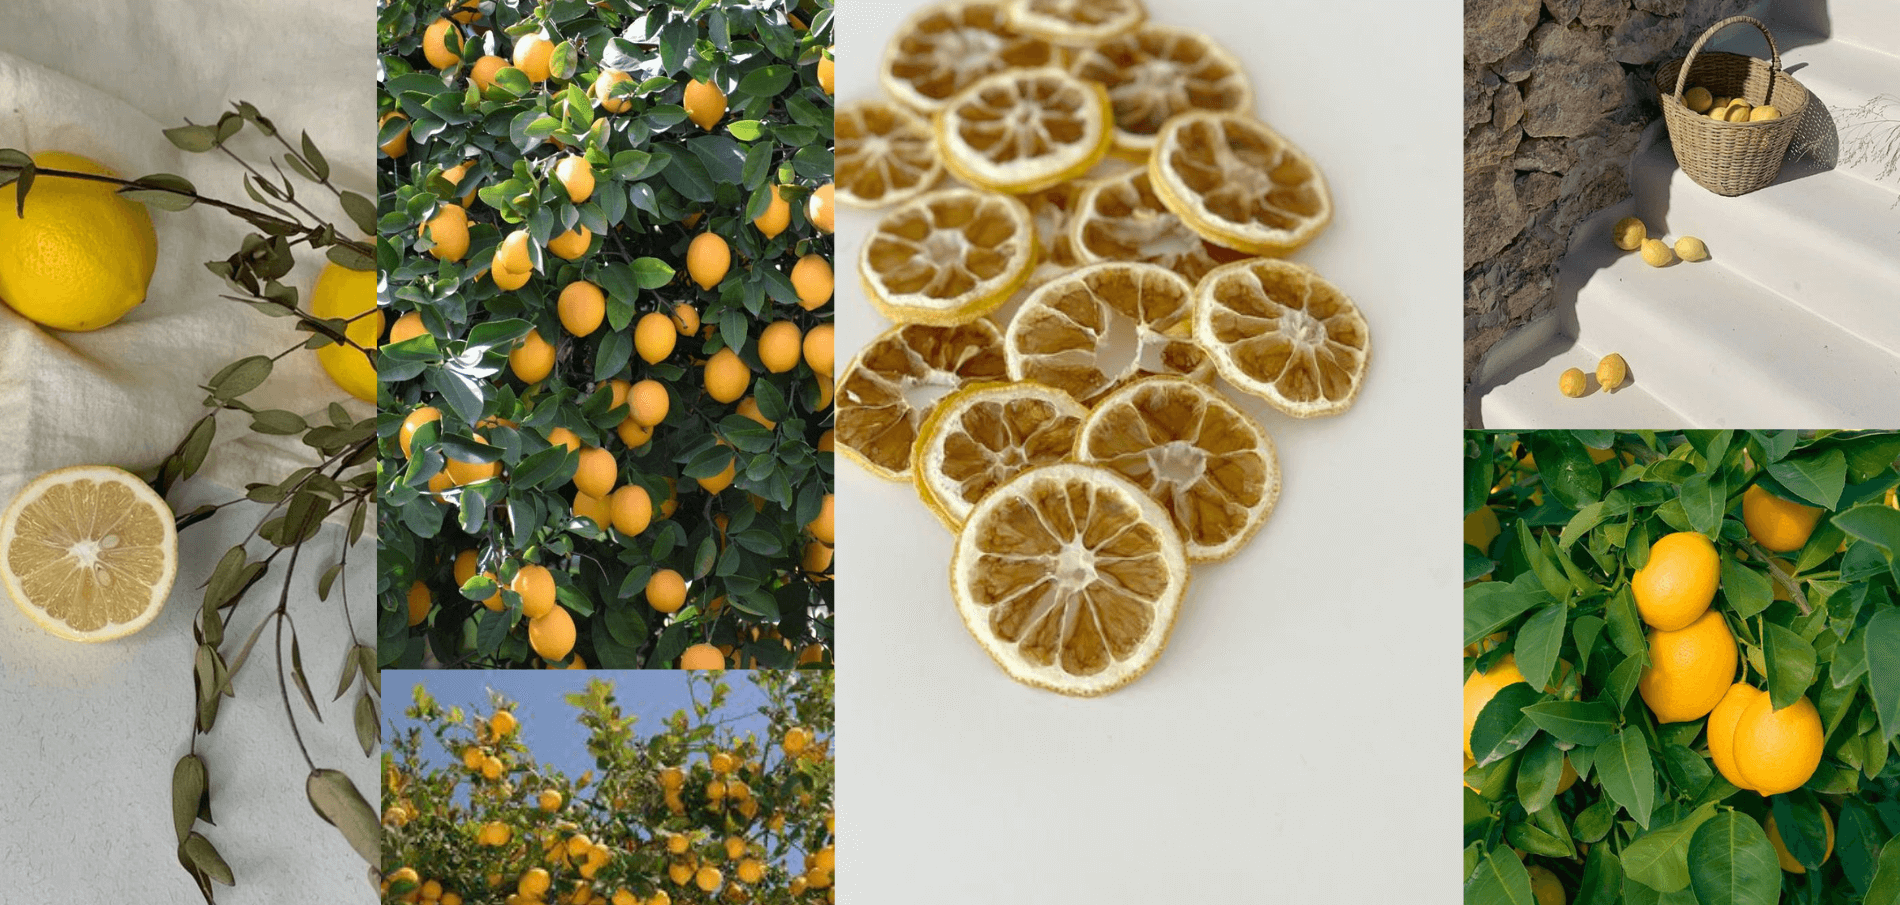 How to Grow and Care for a Lemon Tree